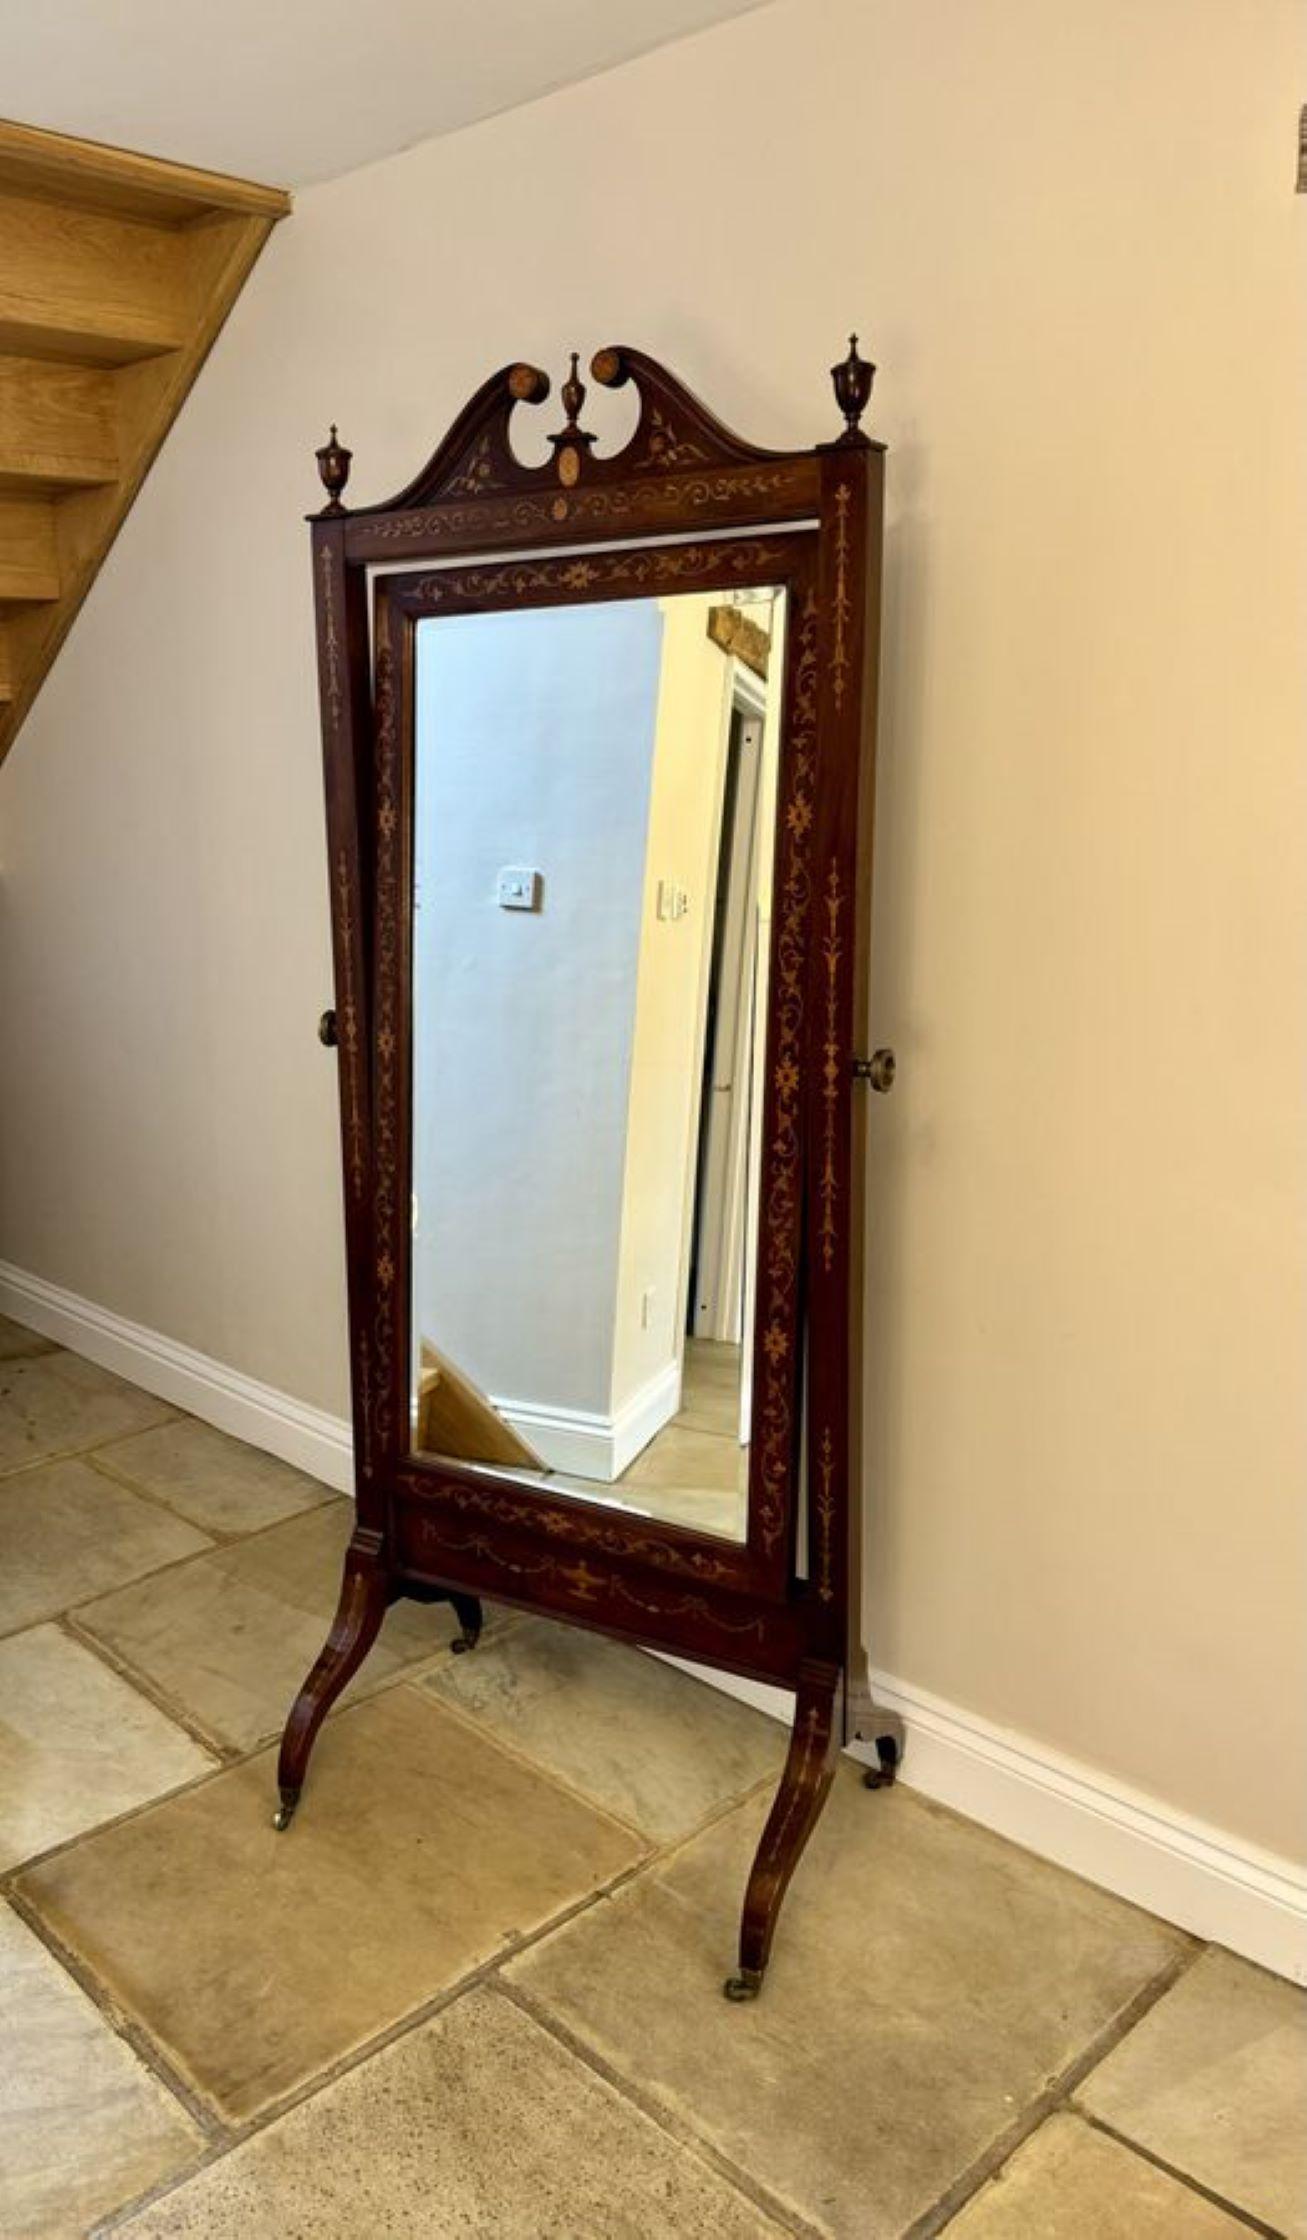 Superb quality antique Victorian mahogany inlaid cheval mirror, having a superb quality mahogany inlaid swan neck pediment above a bevelled edge adjustable mirror in a beautiful mahogany inlaid frame, standing on shaped sabra legs with the original